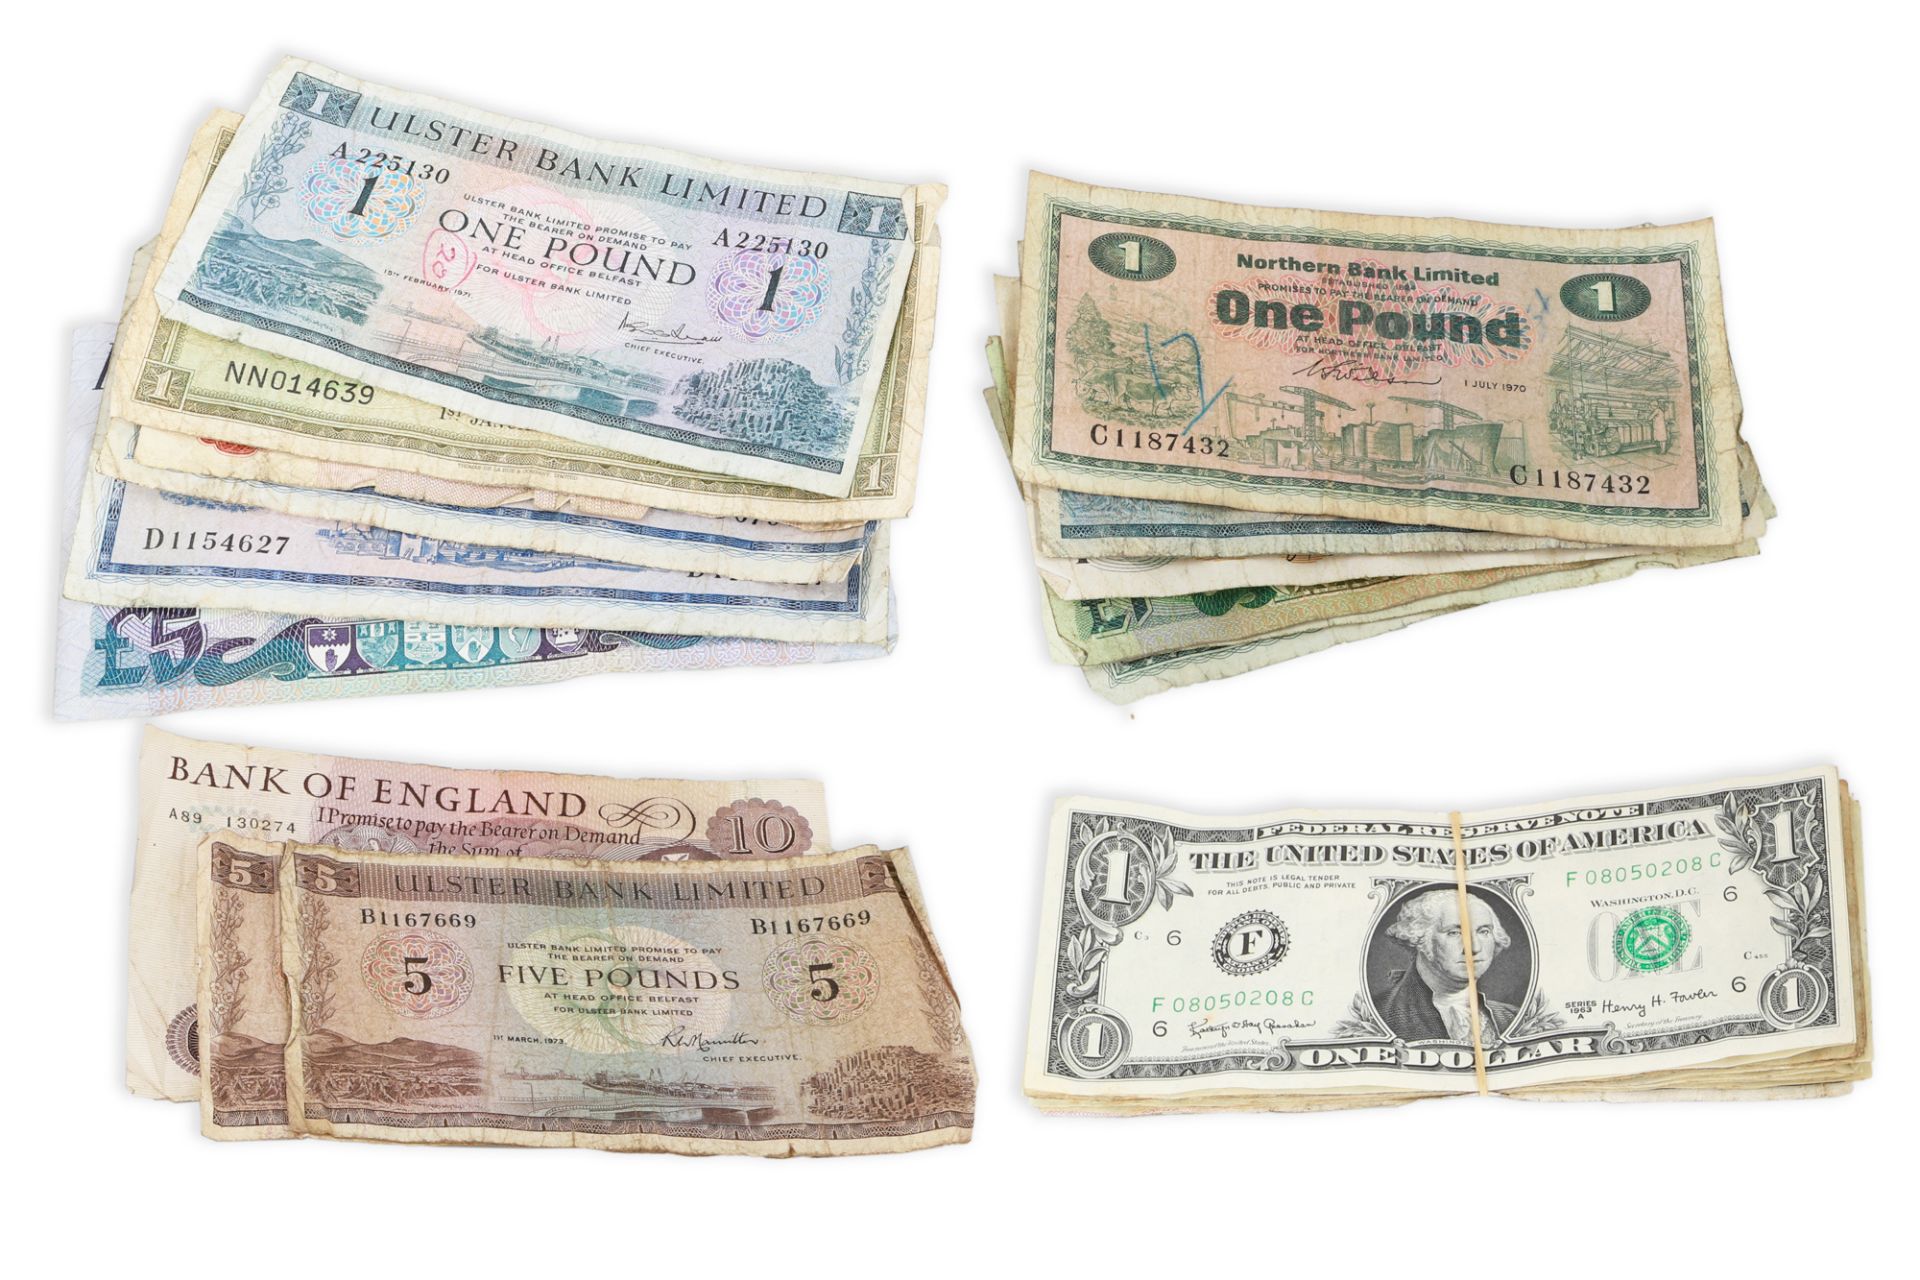 AN ENGLISH FORDE 1960S £10, plus 5 x £5 & 8 x £1 various N.Irish banknotes, 1960s to 1970s, 16 x